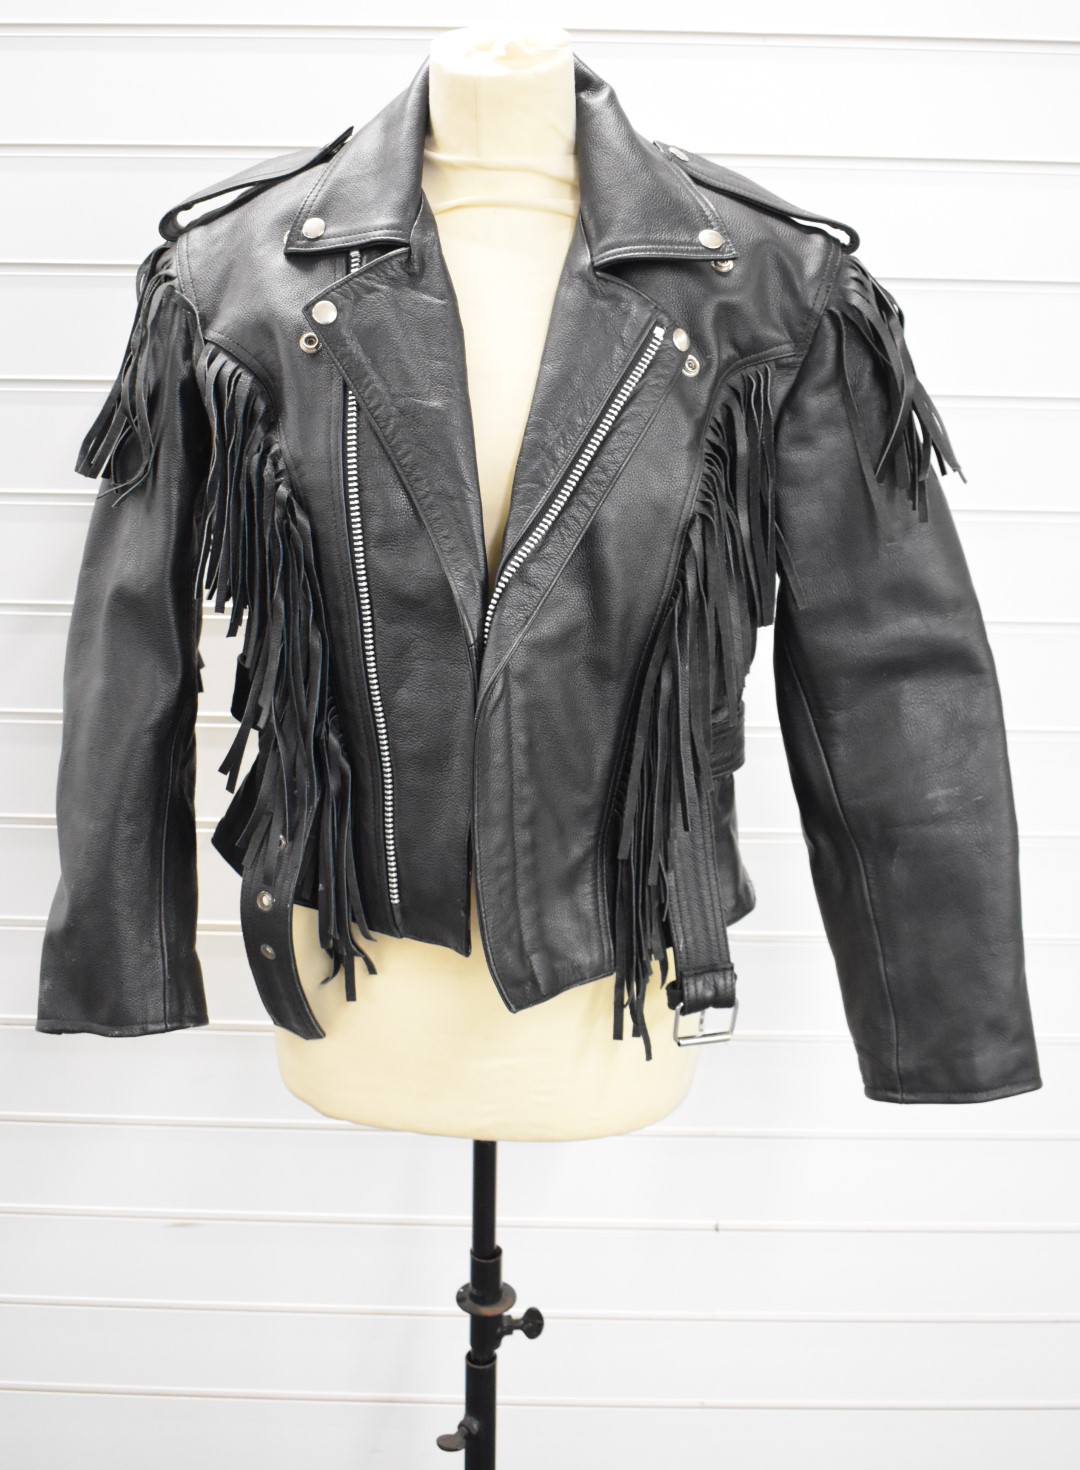 Hunter Class fringed leather motorcycle jacket and a waistcoat by Heavy Duty Leather Company, both - Image 11 of 24